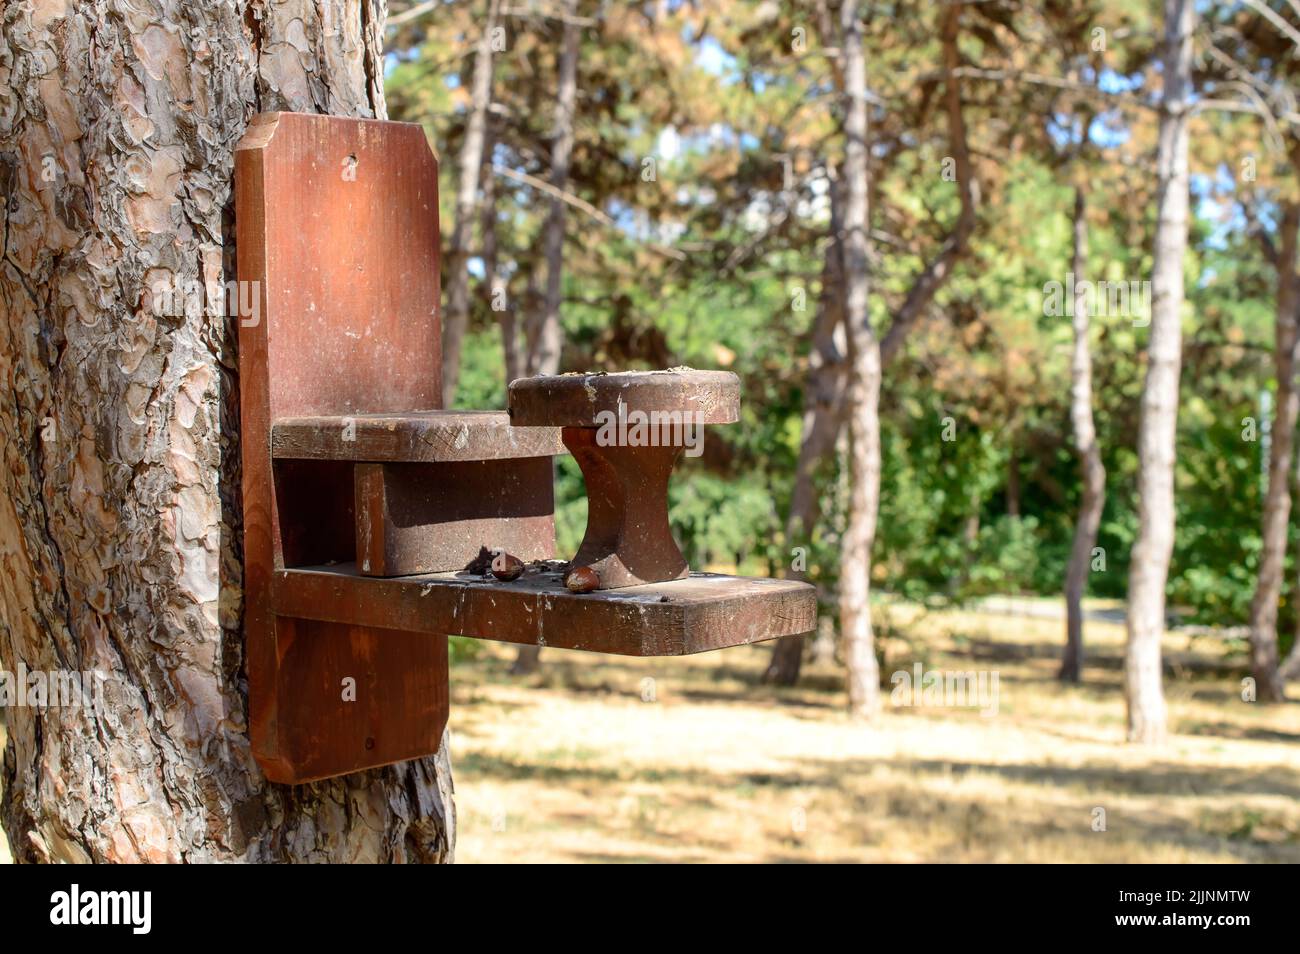 Wooden birdhouse or feeder  attached to the tree in a park. Birds are on the way for the next food session. Stock Photo